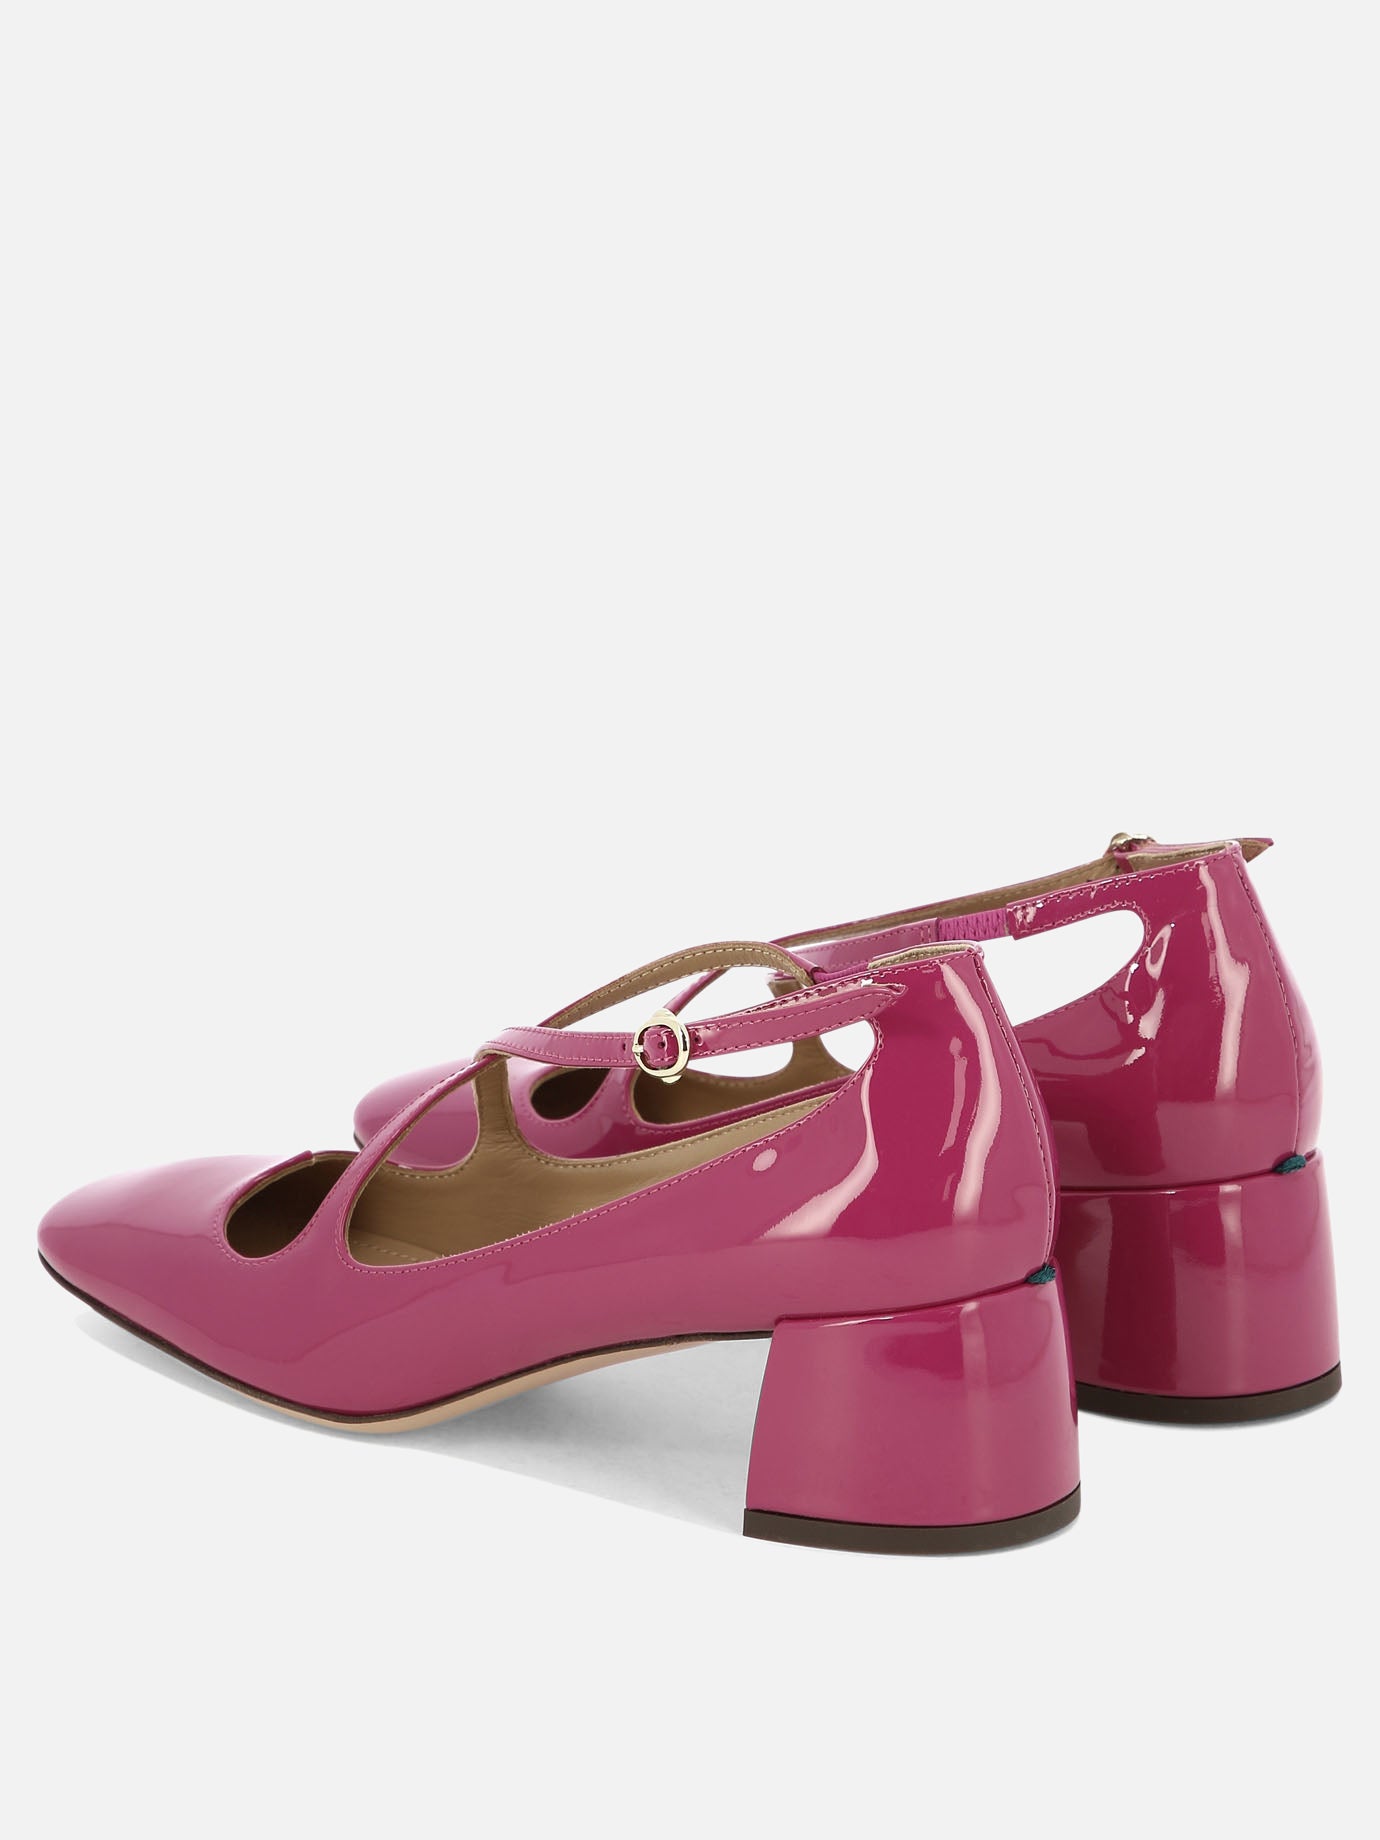 "Two For Love" pumps